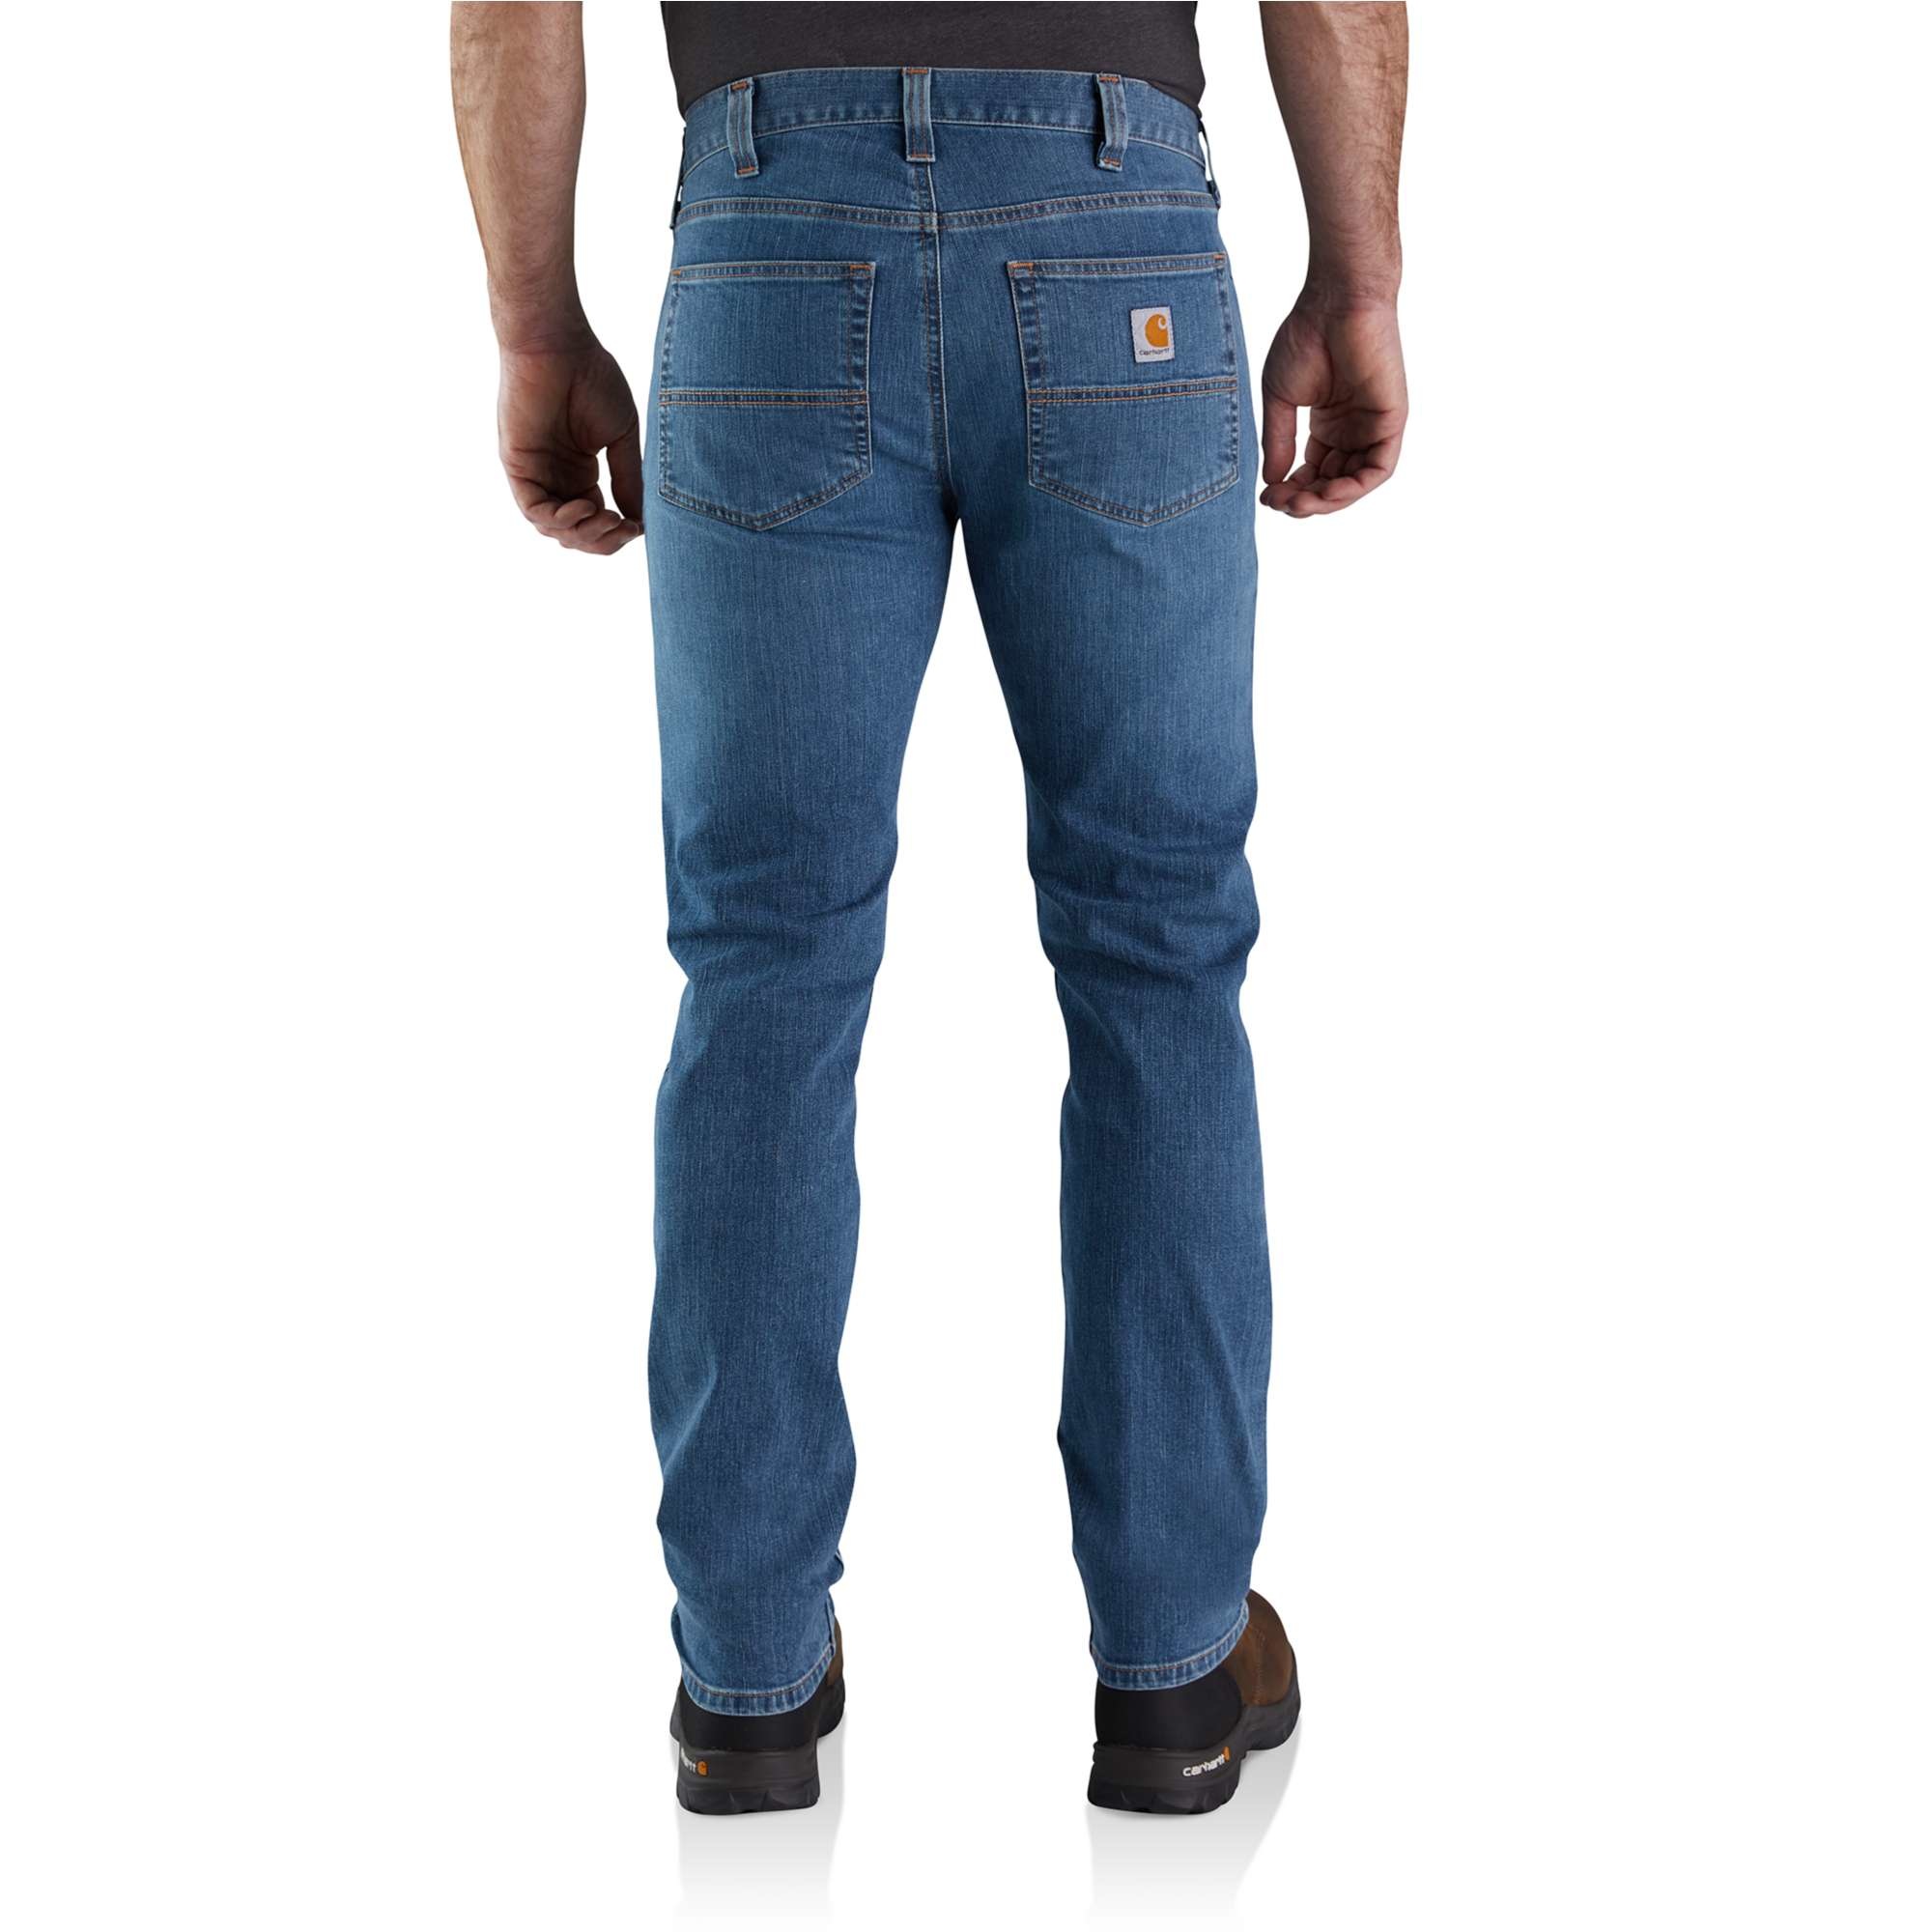 Women's High Waisted Jean - Slim Taper Fit - Rugged Flex®, Coming Soon